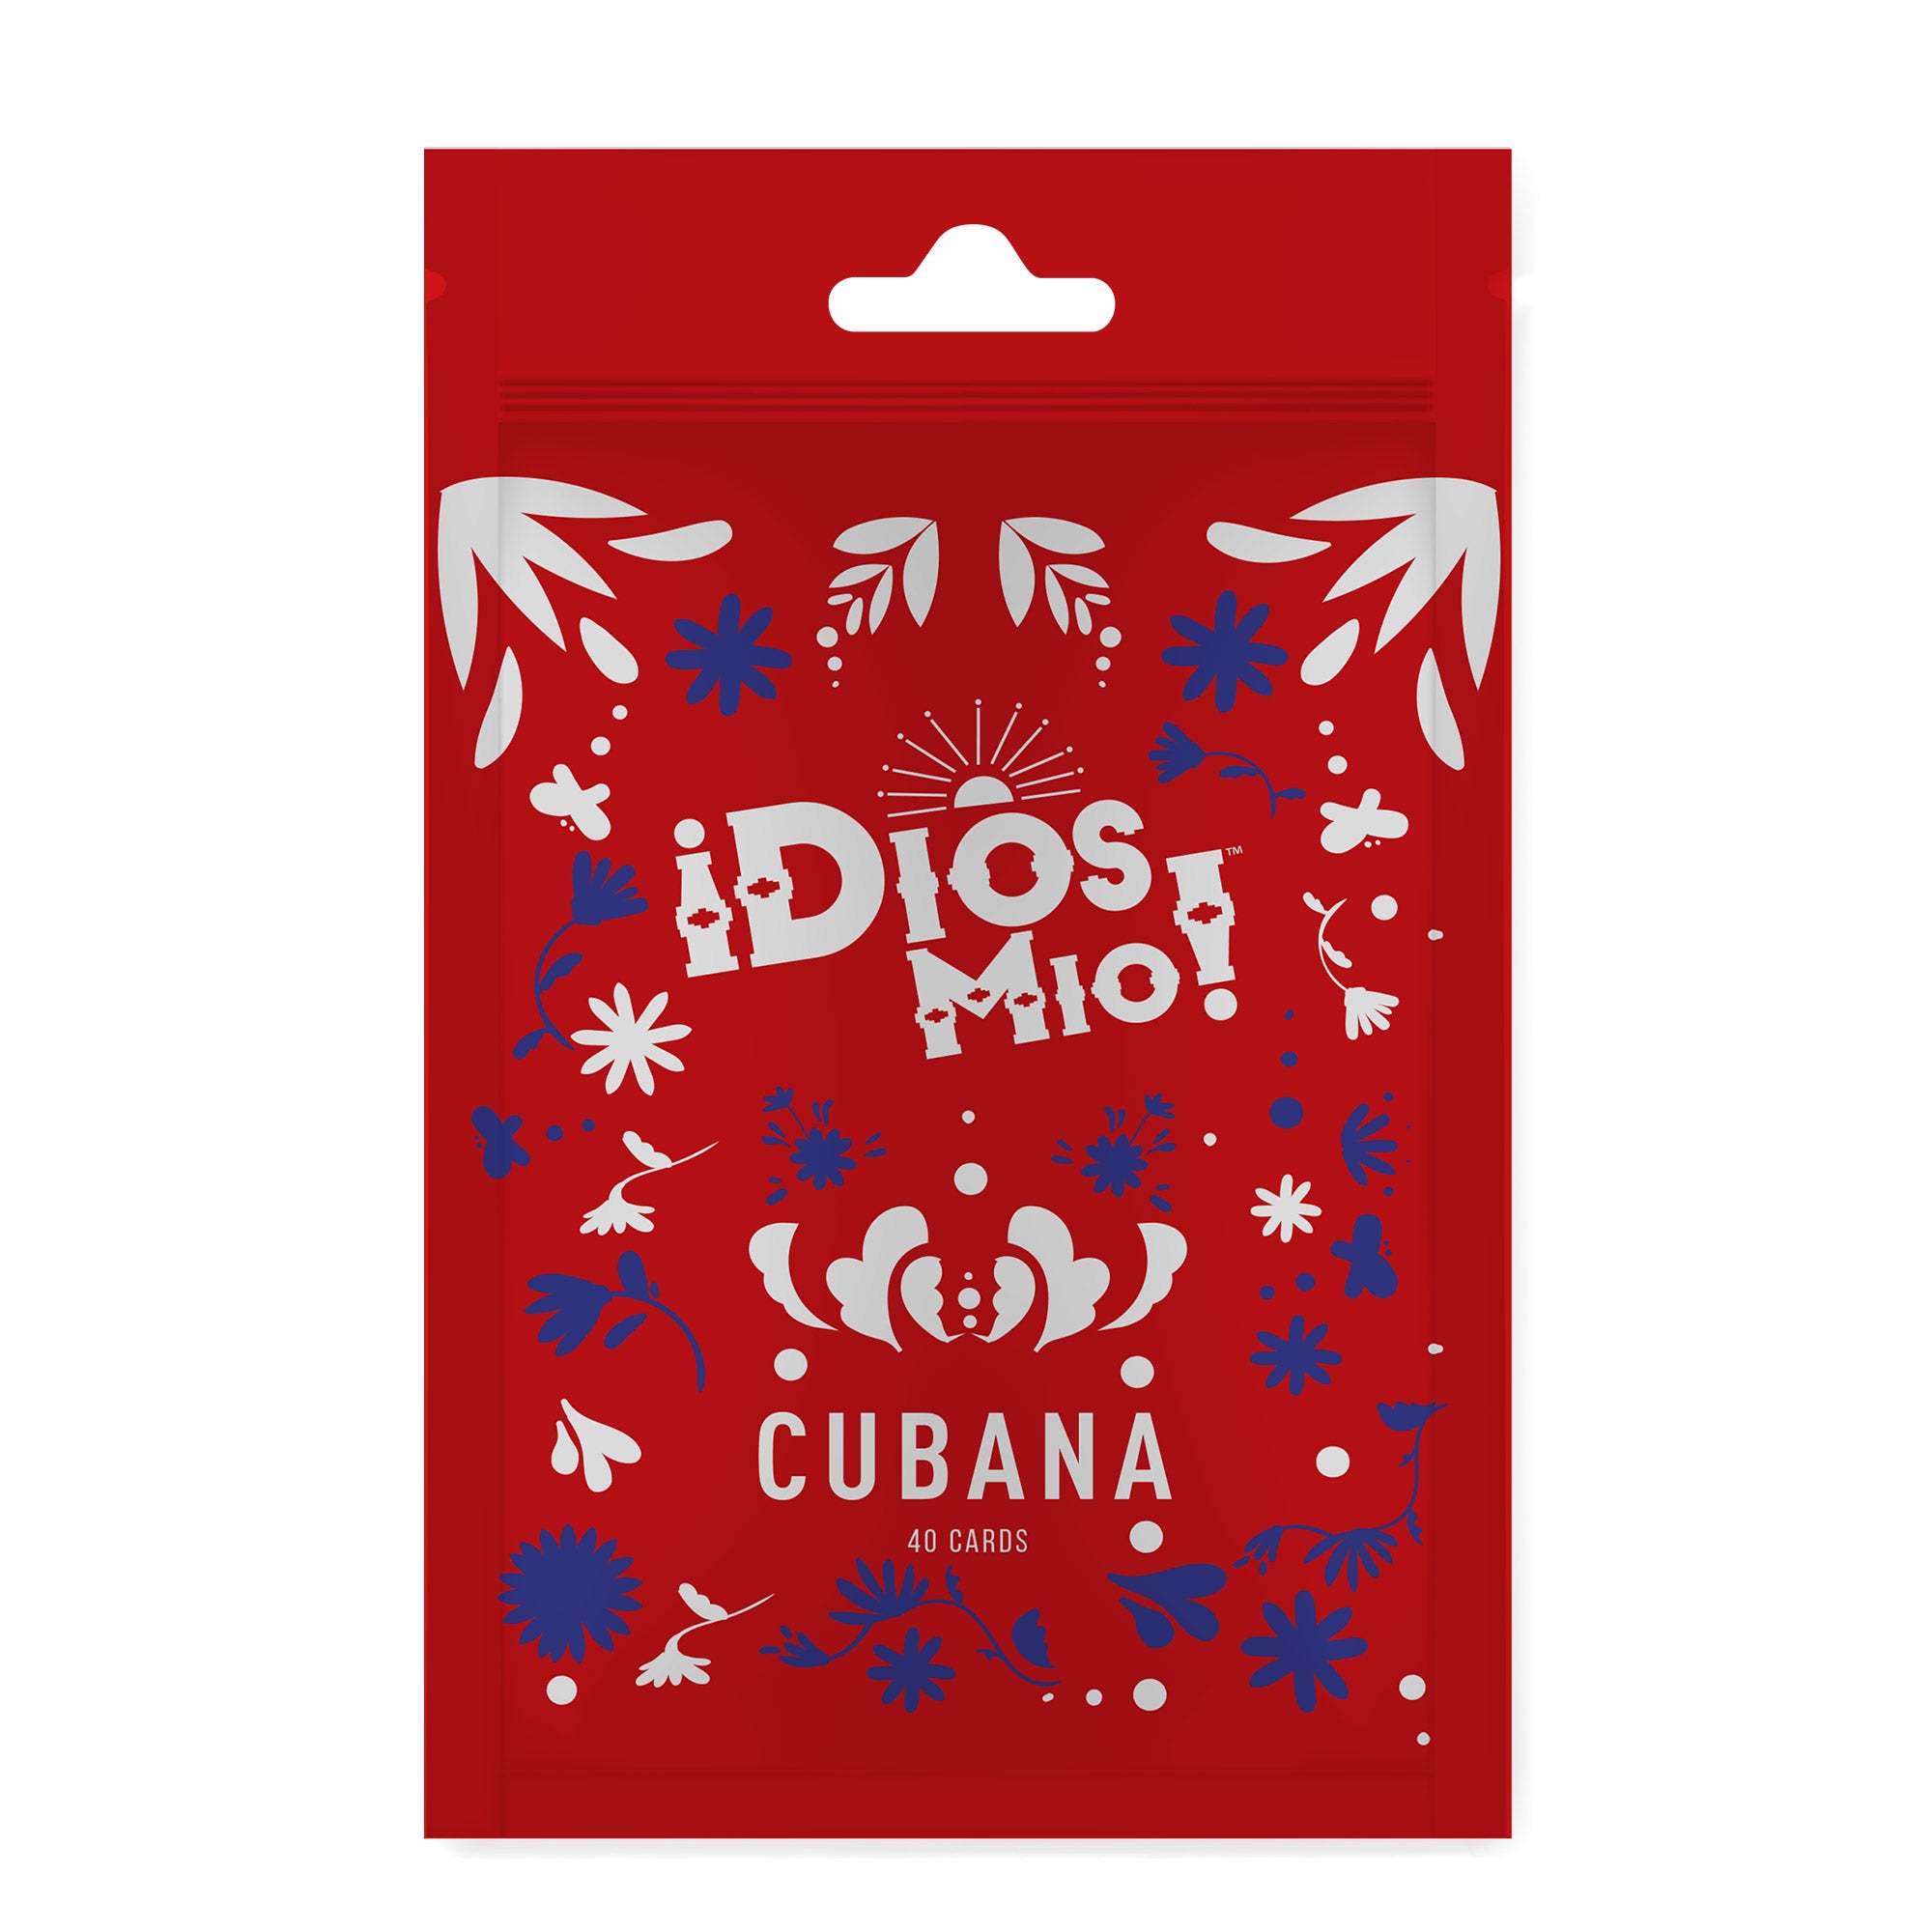 ¡Dios Mio!® - Cubana Expansion Pack